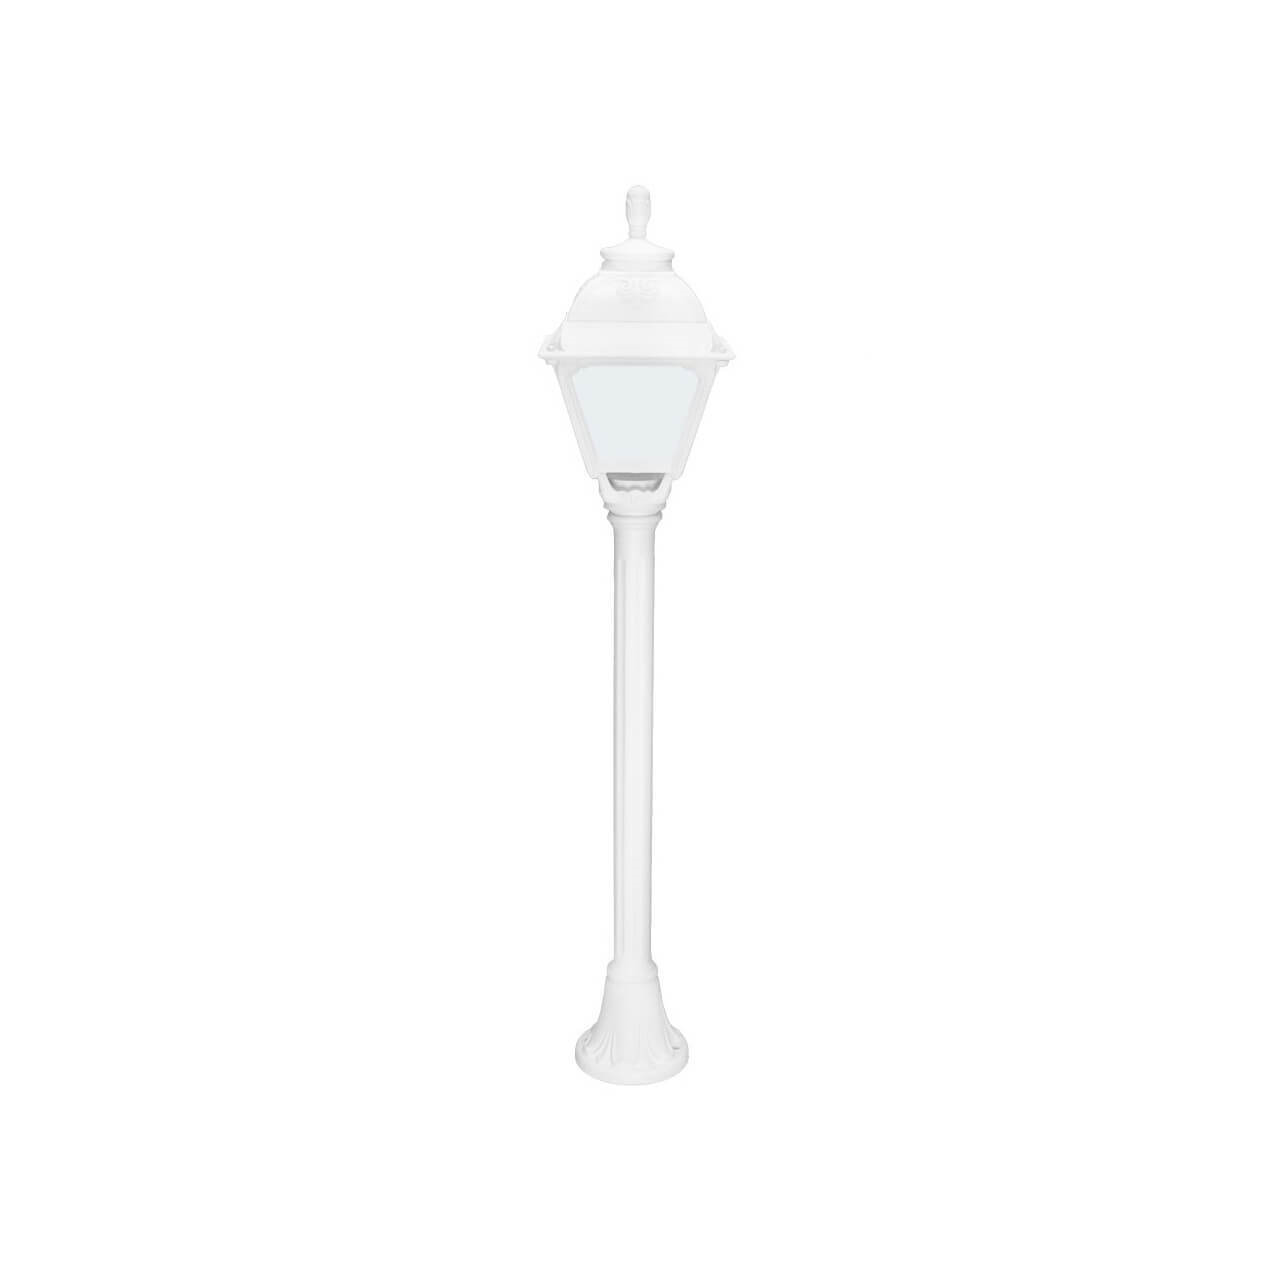 FUMAGALLI - MIZAR/CEFA Outdoor Post Light with Opal Diffuser (White)